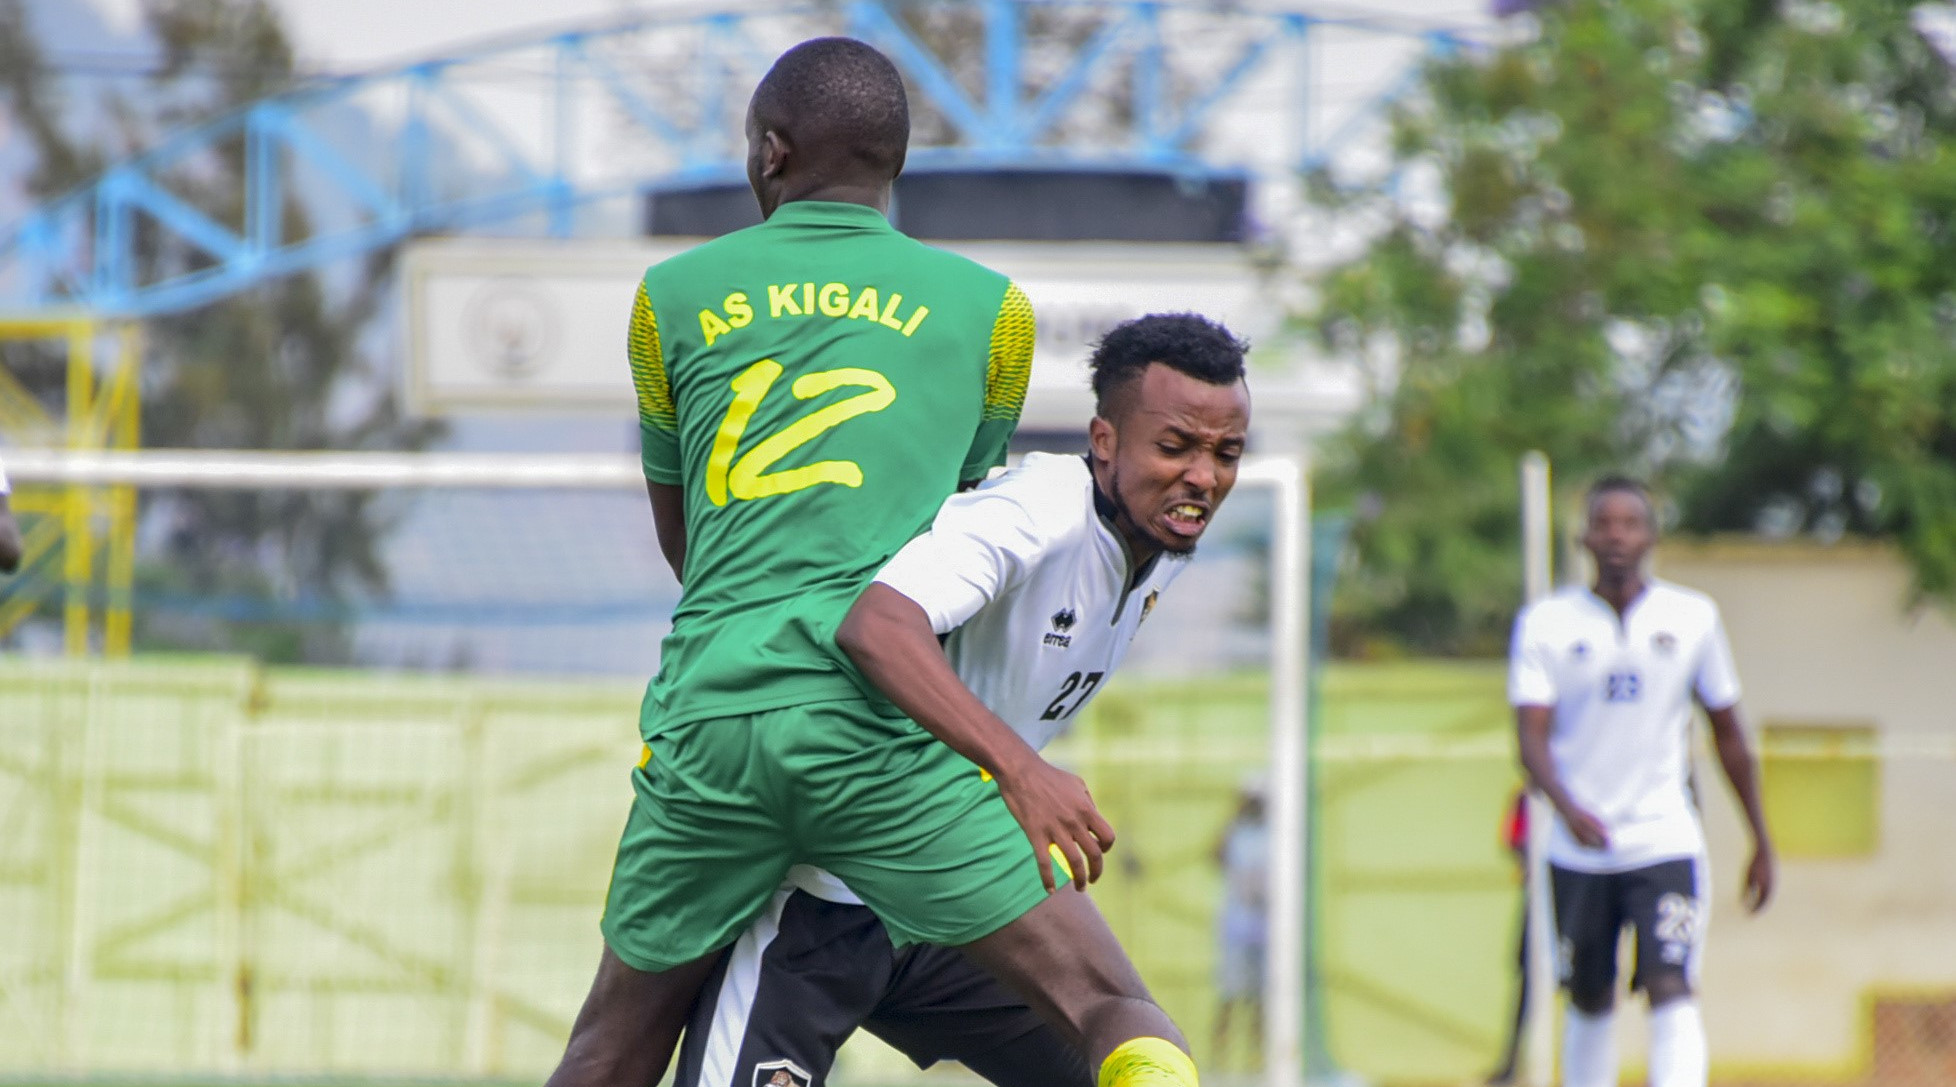 Dominique Savio Nshuti (27), seen here in action against AS Kigali, joined Police this week after being released by APR earlier this month. / File